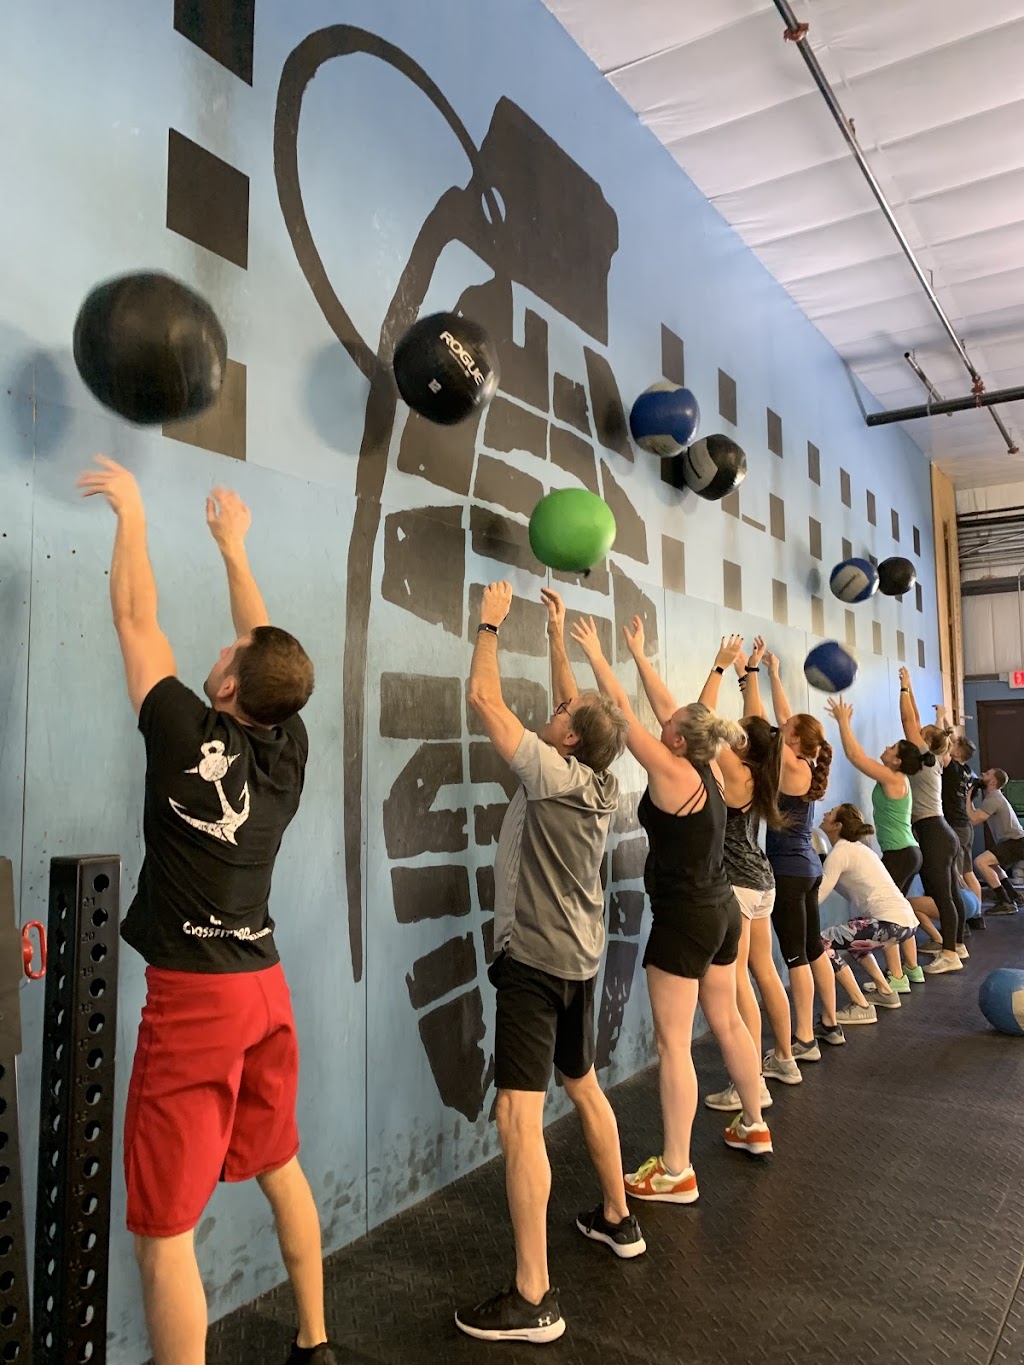 CrossFit Explode | 19 Hagerty Blvd #7, West Chester, PA 19382 | Phone: (610) 517-5961